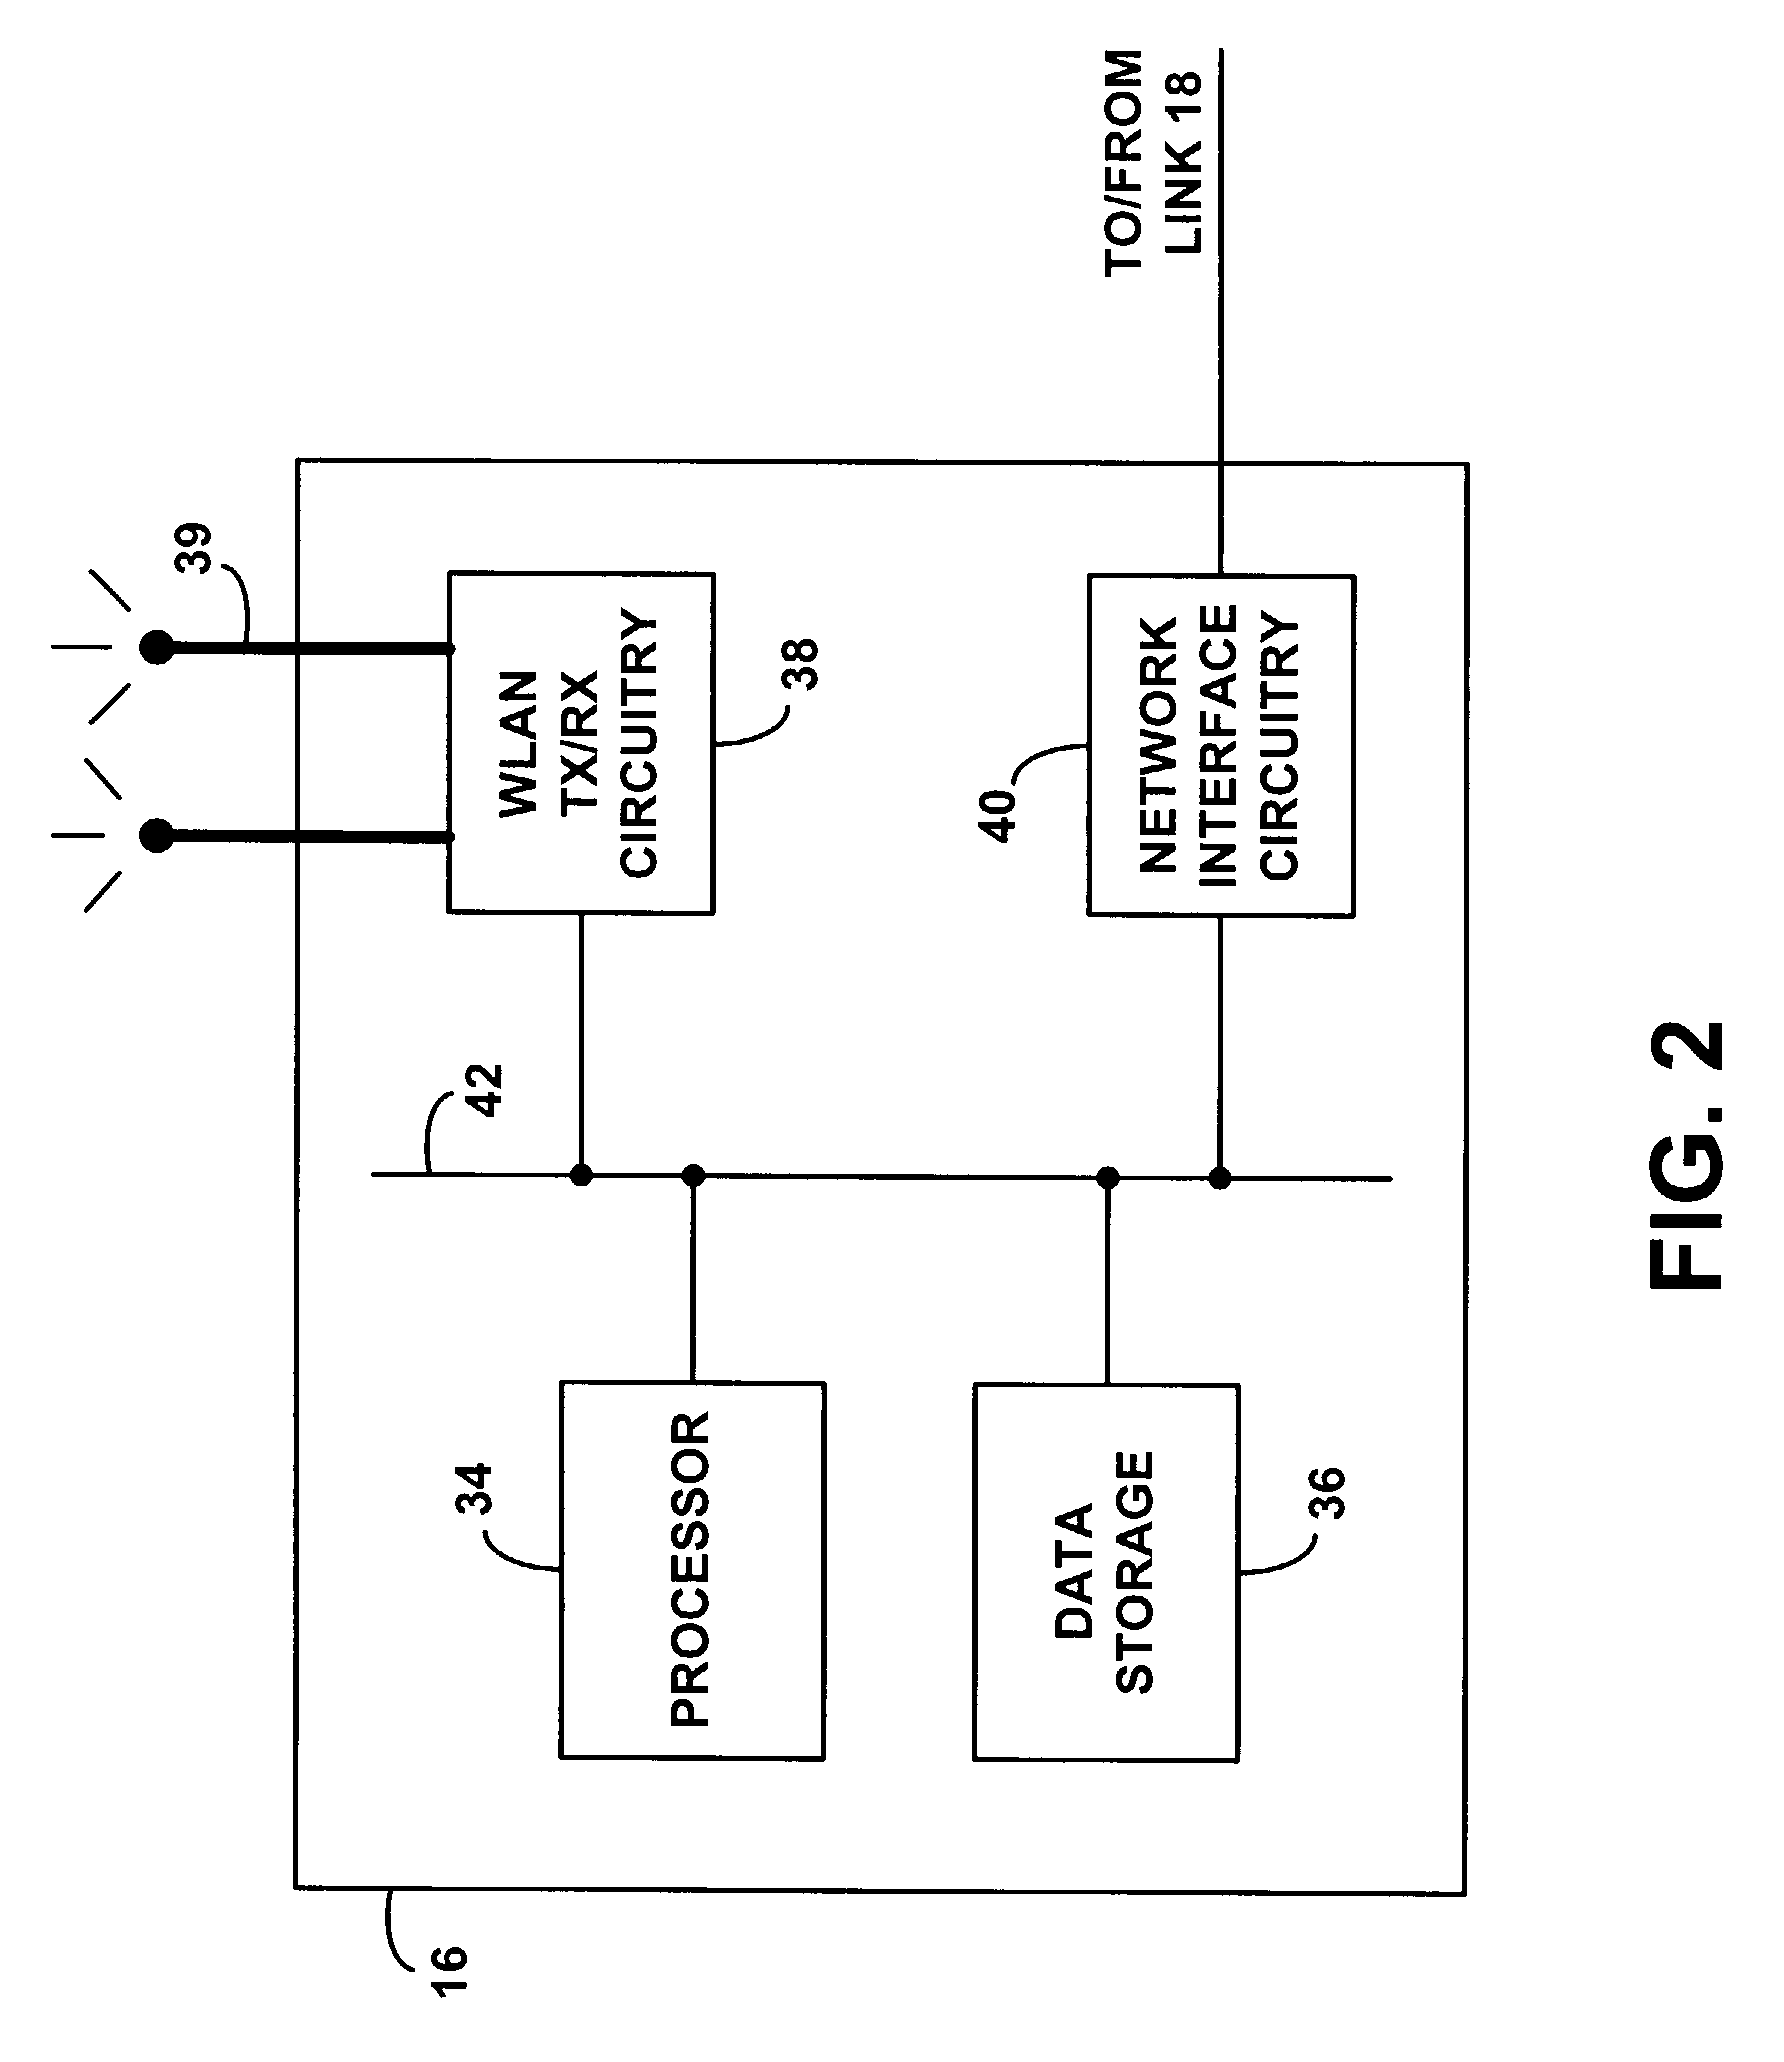 Method and system for distribution of voice communication service via a wireless local area network